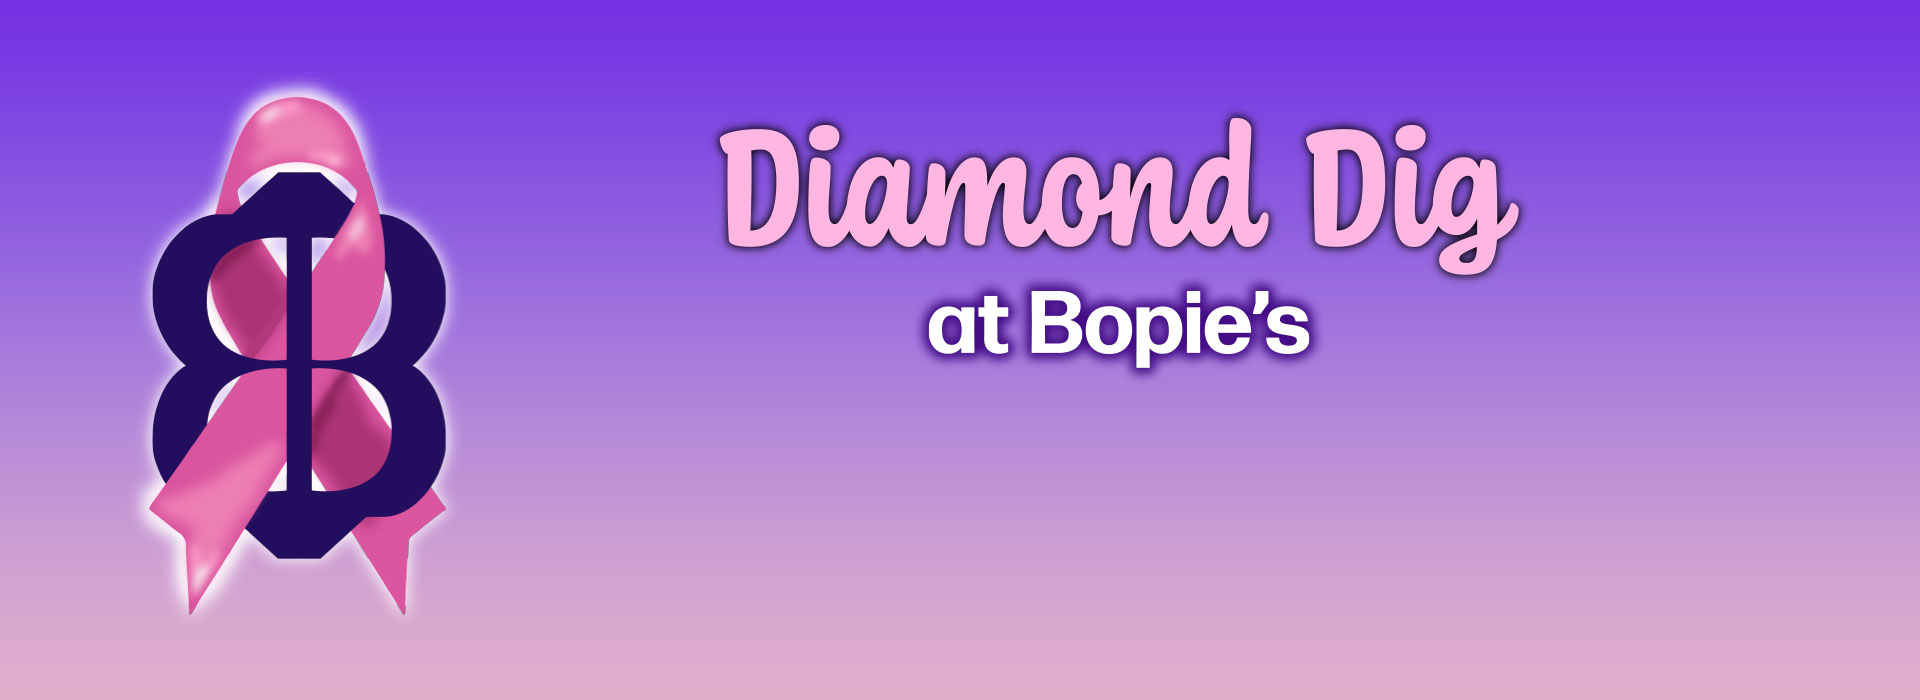 diamond dig banner for Bopies